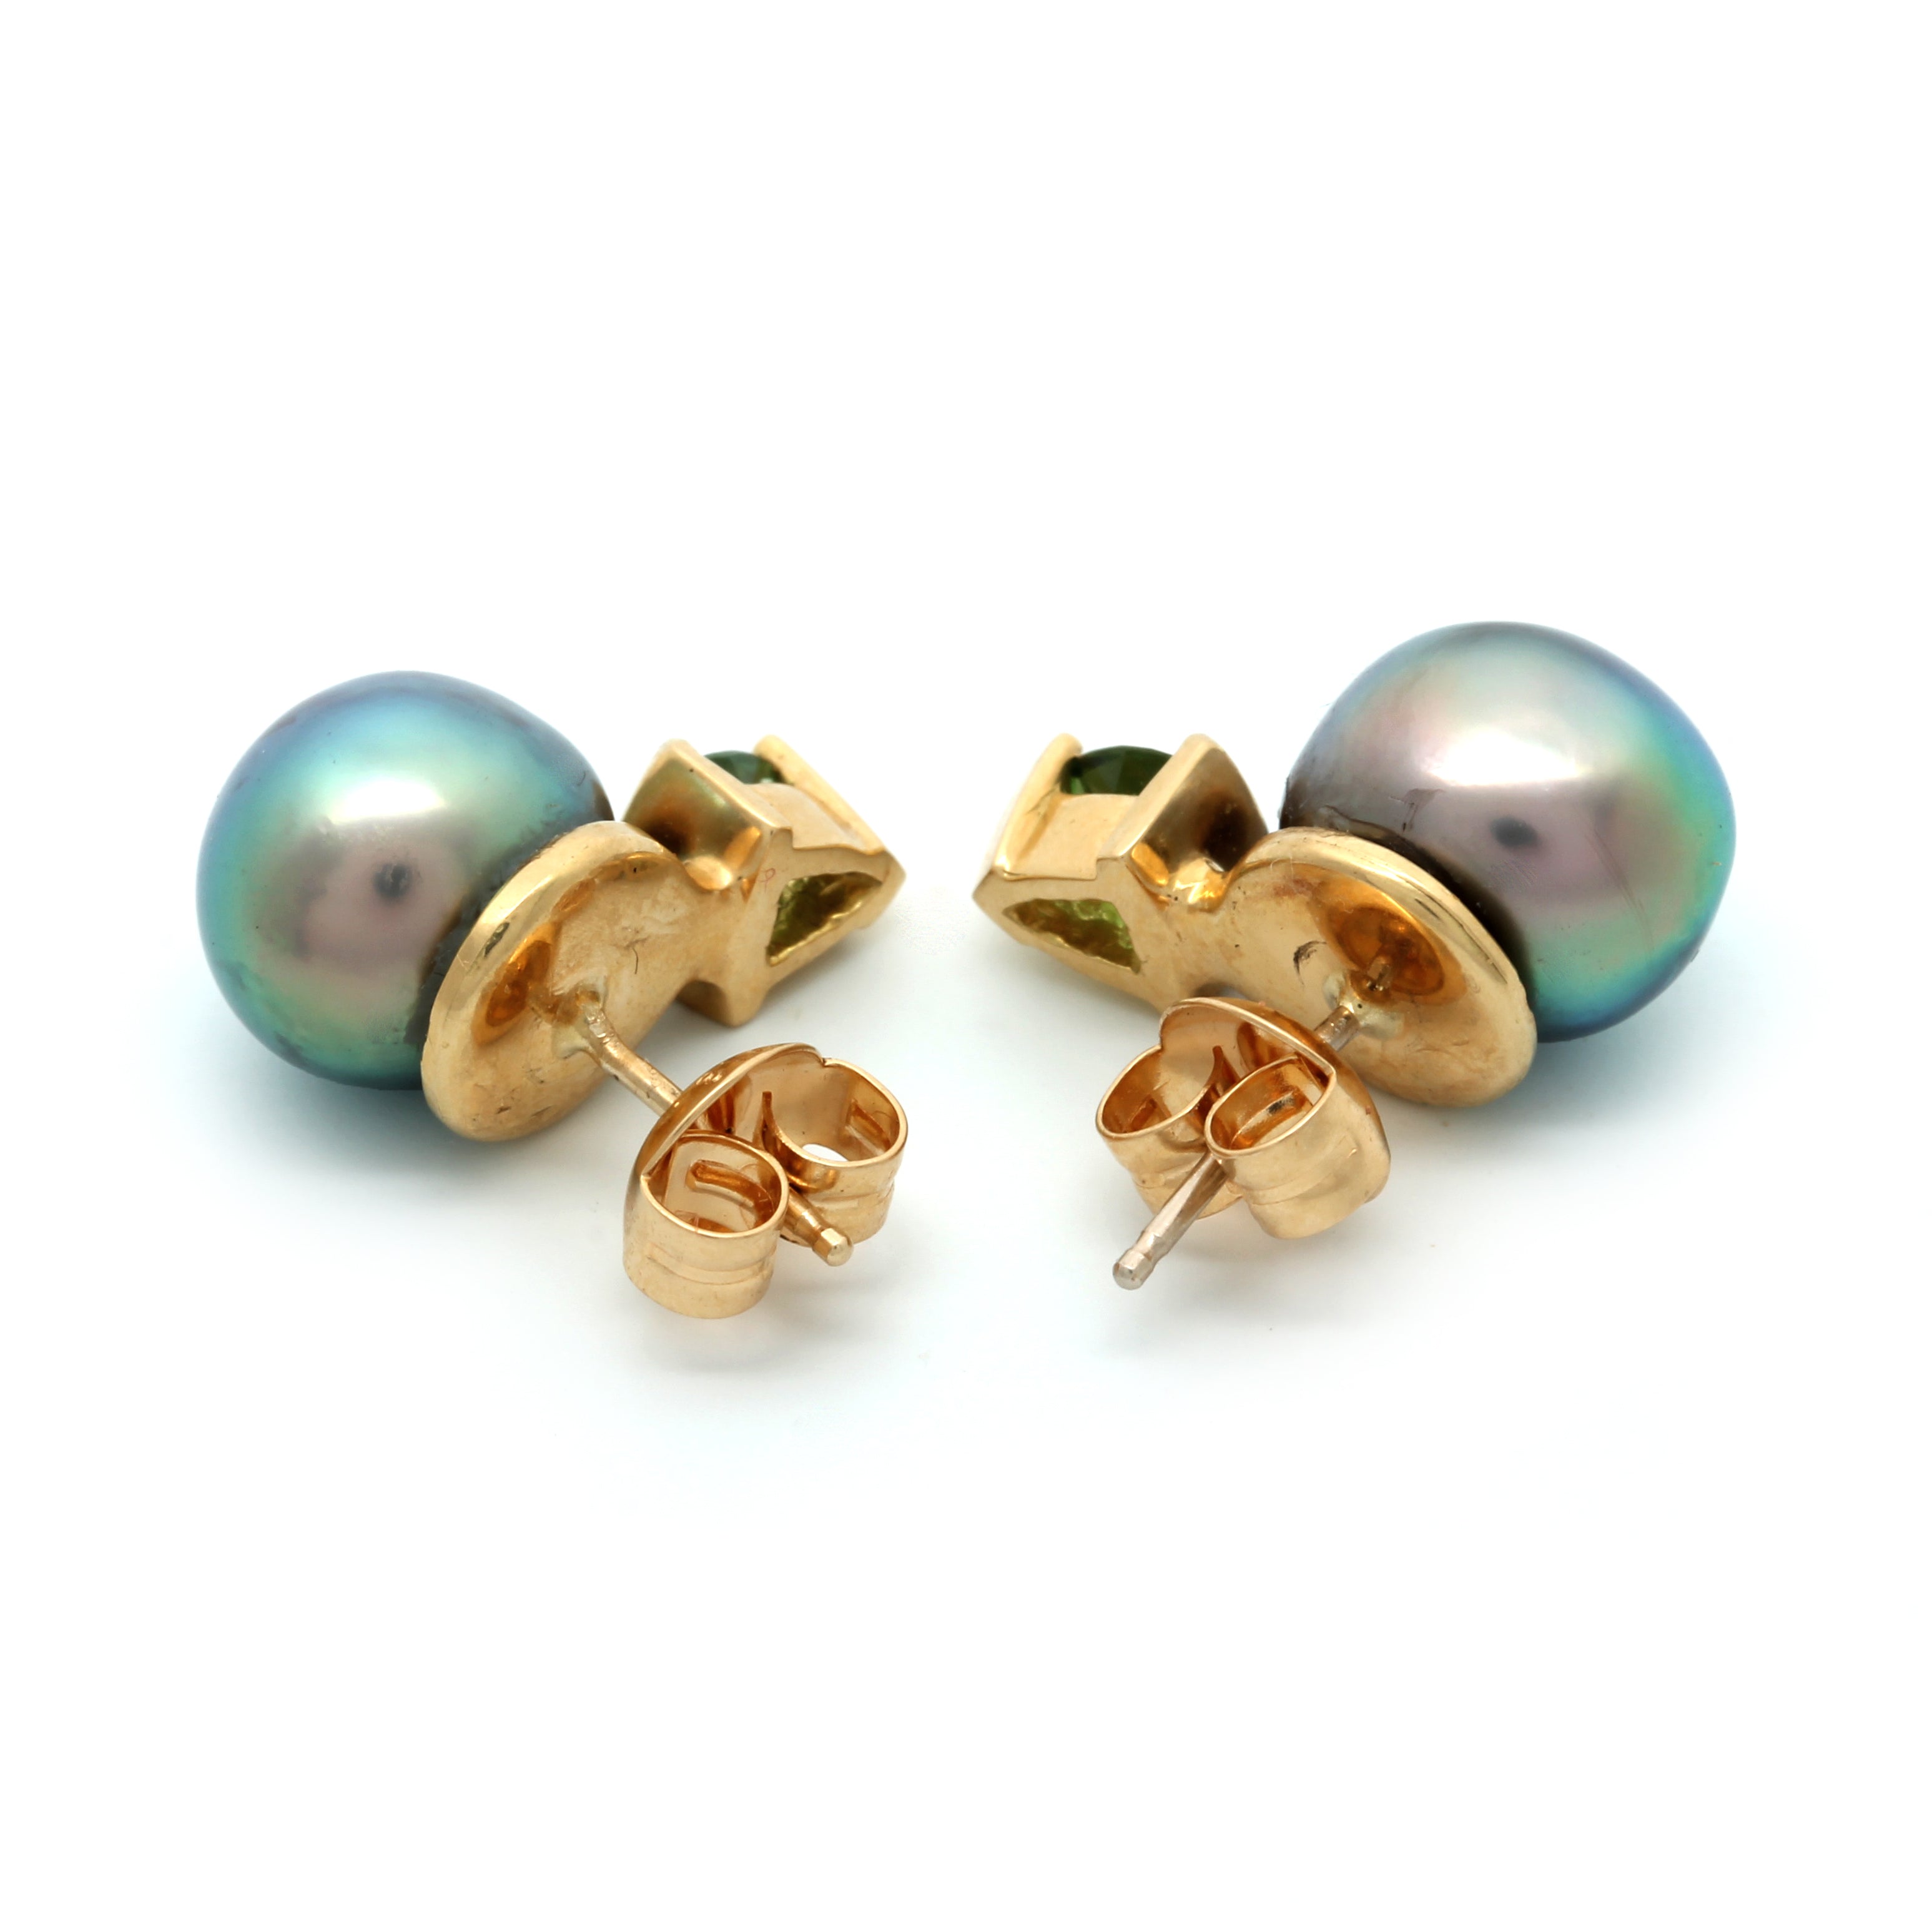 18K Yellow Gold Earrings with Cortez Pearls and Green Tourmalines